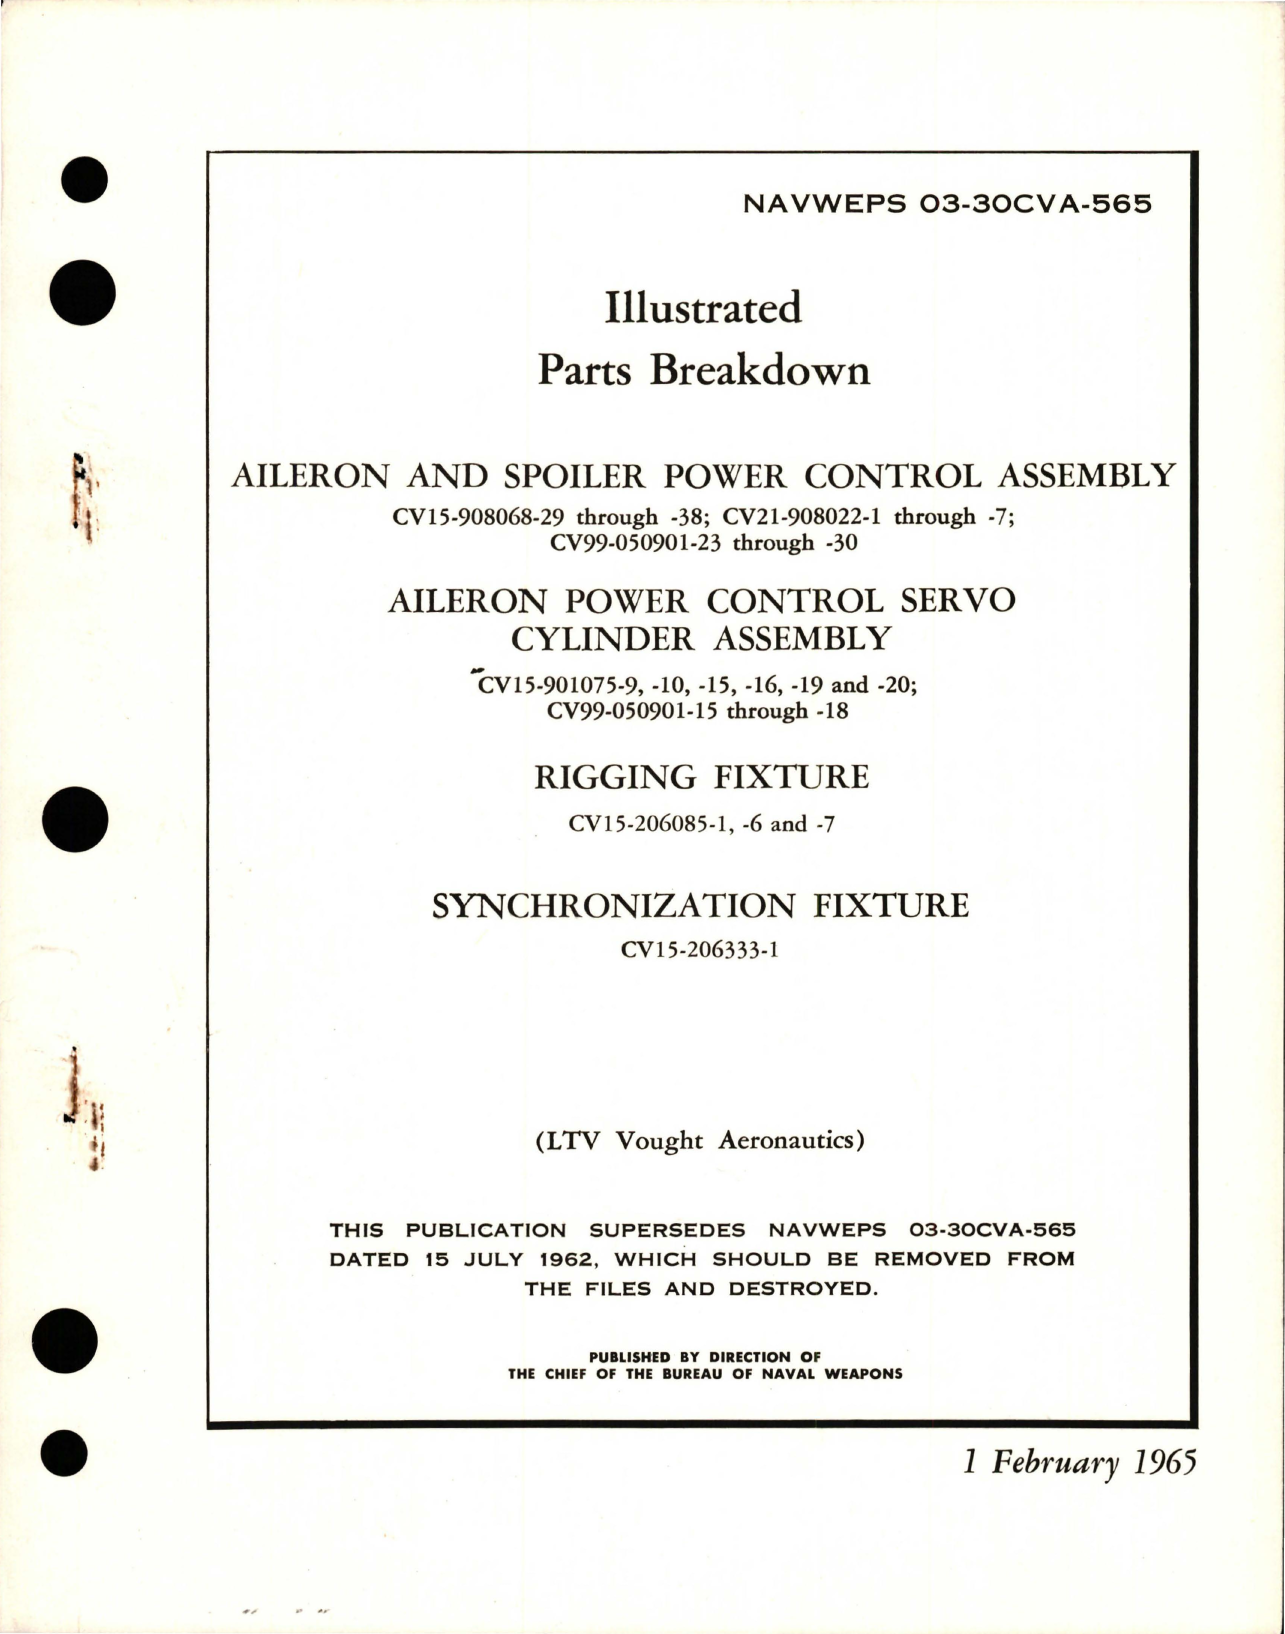 Sample page 1 from AirCorps Library document: Illustrated Parts Breakdown for Aileron and Spoiler Power Control and Cylinder Assemblies, Rigging and Synchronization Fixtures